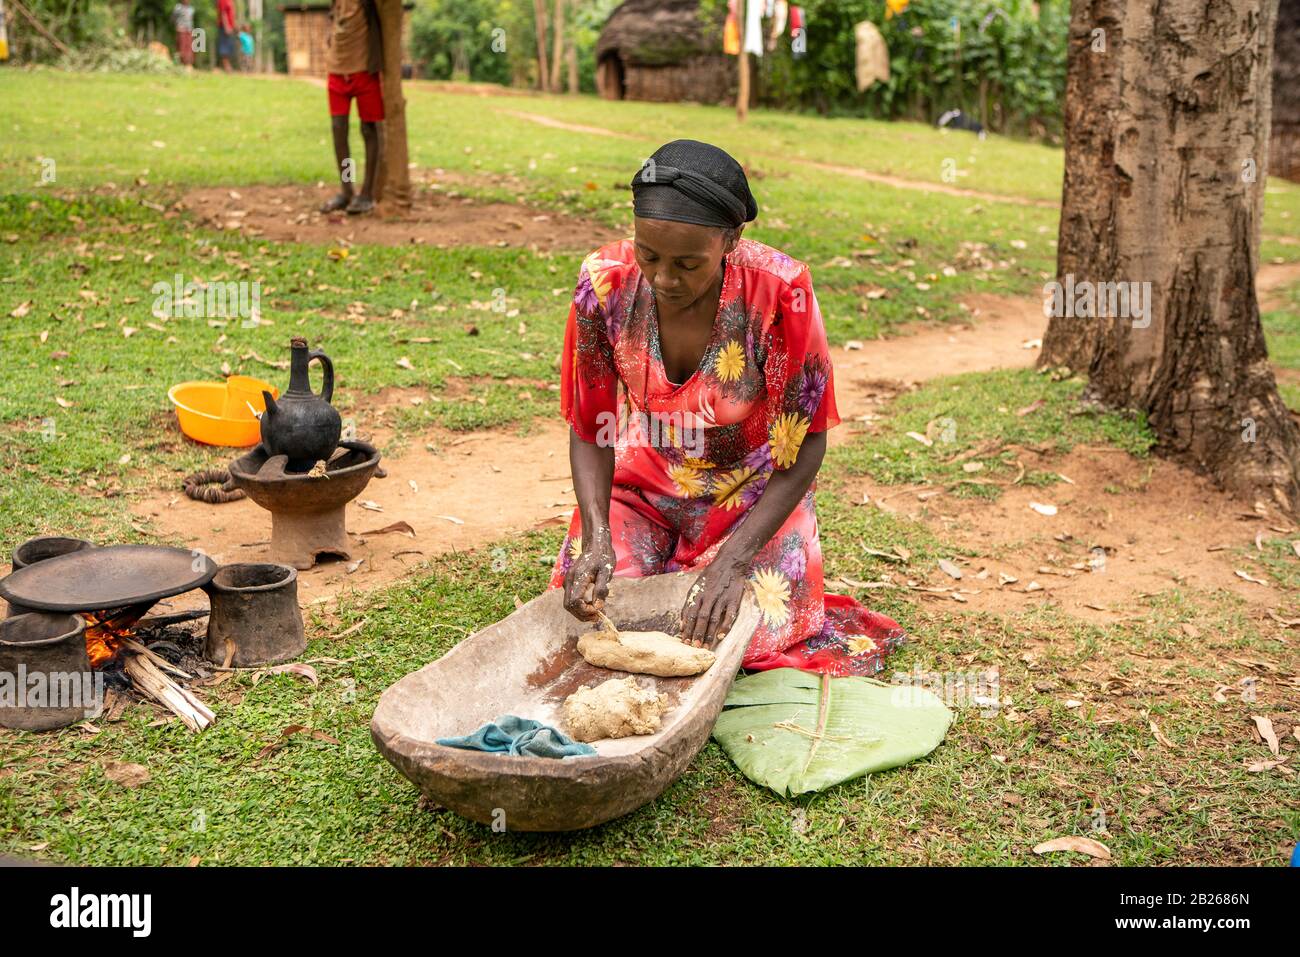 Making of false banana bread-kocho -  from the enset plant in a village in southern Ethiopia Stock Photo